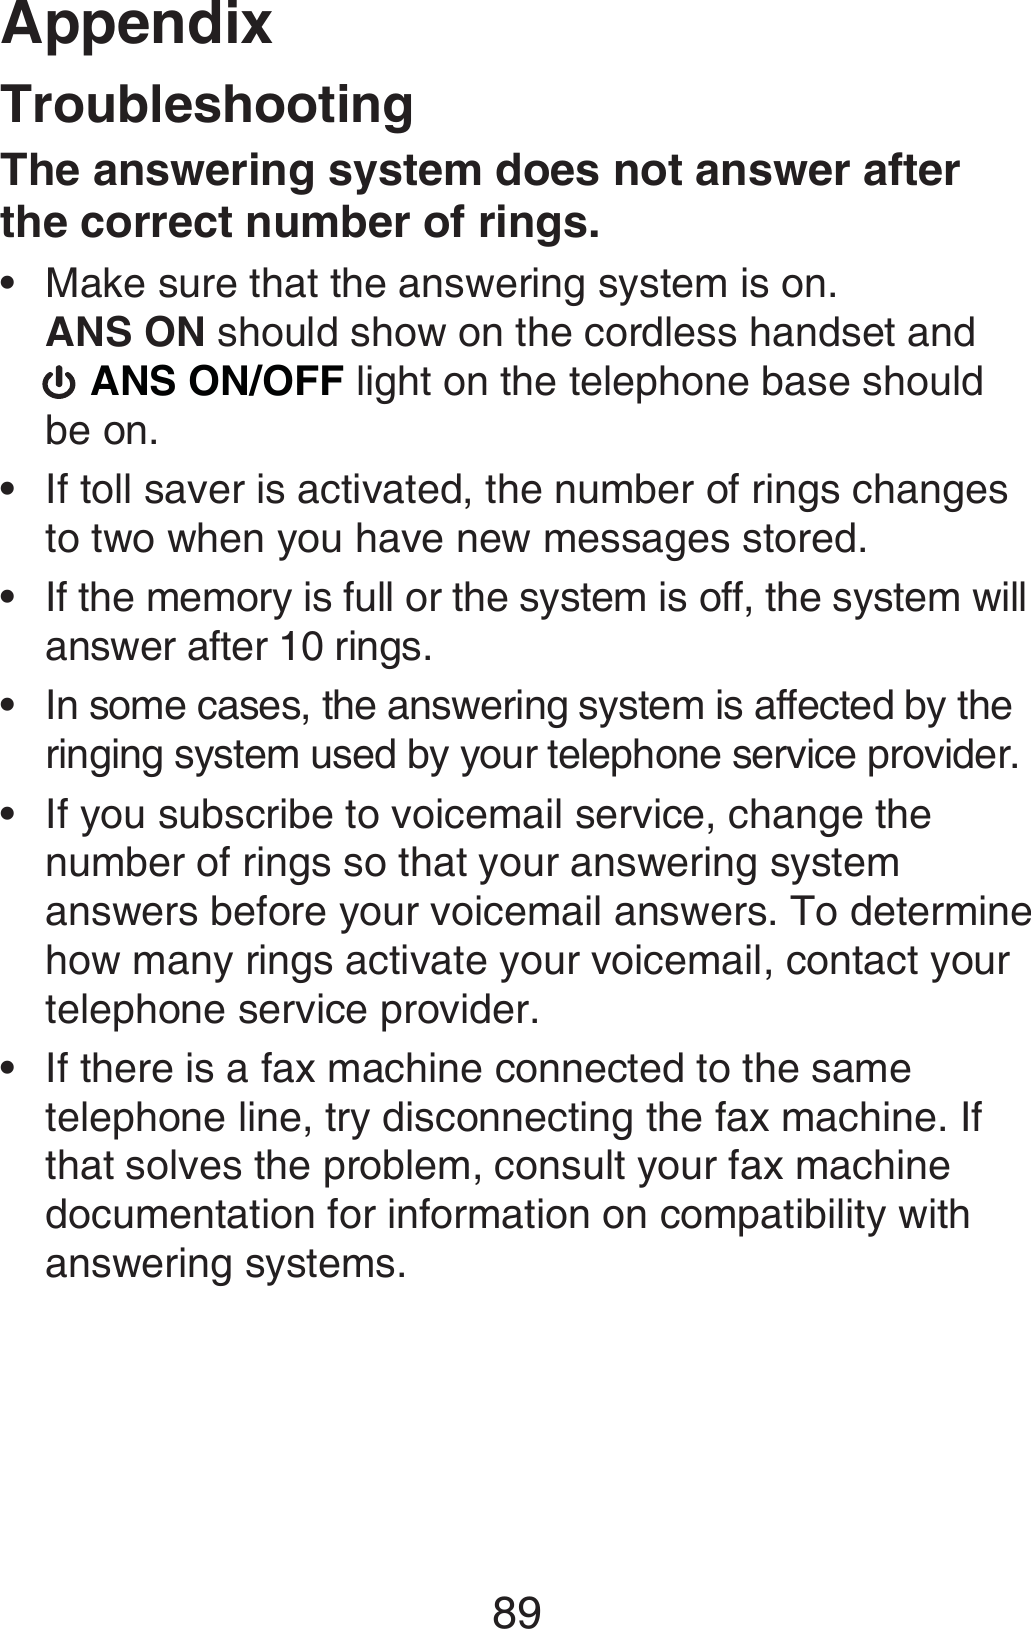 Appendix89TroubleshootingThe answering system does not answer after the correct number of rings.Make sure that the answering system is on.  ANS ON should show on the cordless handset and   ANS ON/OFF light on the telephone base should be on.If toll saver is activated, the number of rings changes to two when you have new messages stored.If the memory is full or the system is off, the system will answer after 10 rings.In some cases, the answering system is affected by the ringing system used by your telephone service provider.If you subscribe to voicemail service, change the number of rings so that your answering system answers before your voicemail answers. To determine how many rings activate your voicemail, contact your telephone service provider.If there is a fax machine connected to the same telephone line, try disconnecting the fax machine. If that solves the problem, consult your fax machine documentation for information on compatibility with answering systems.••••••